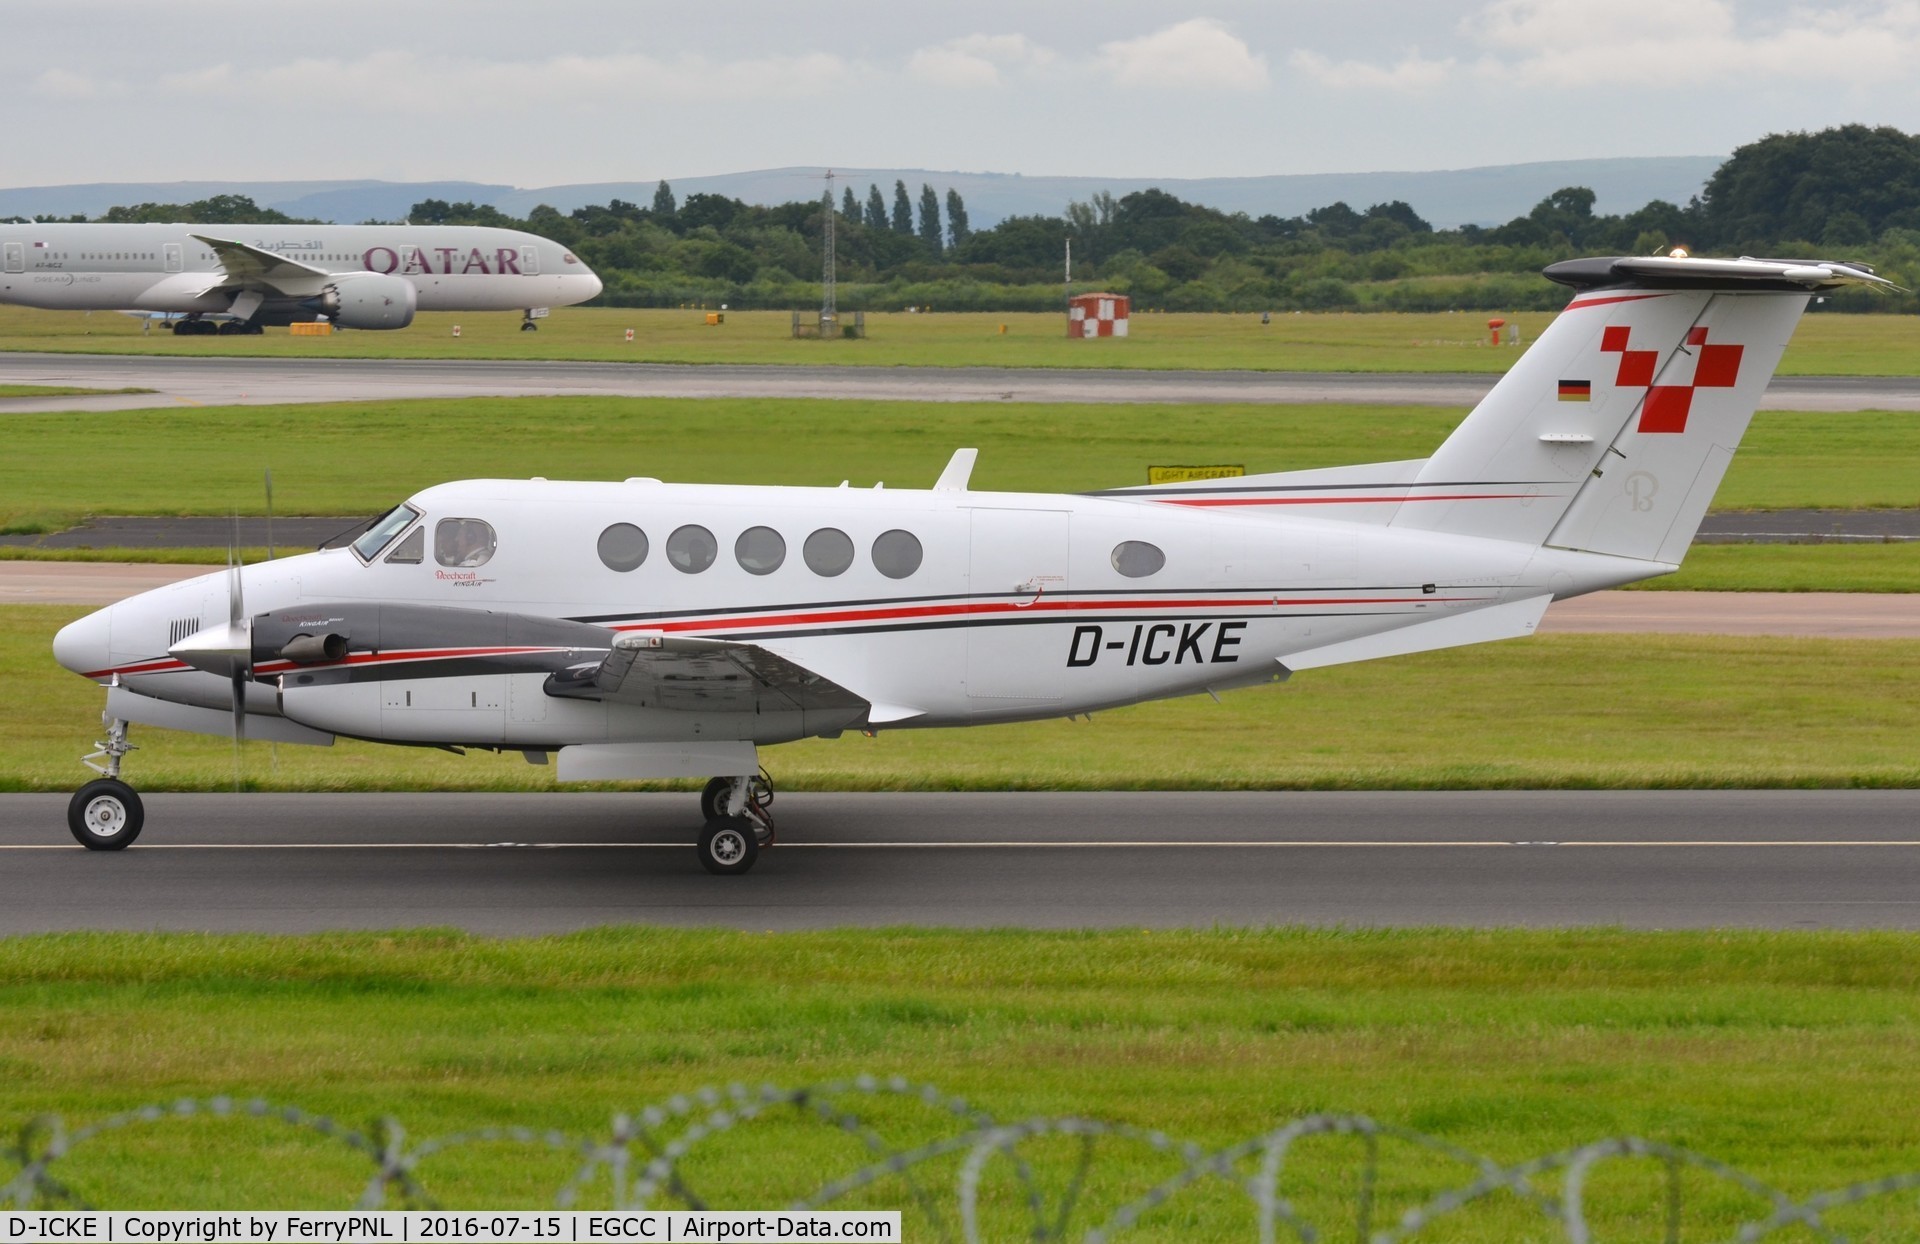 D-ICKE, 2009 Hawker Beechcraft B200GT King Air C/N BY-96, This Be200GT is new in in the German register.